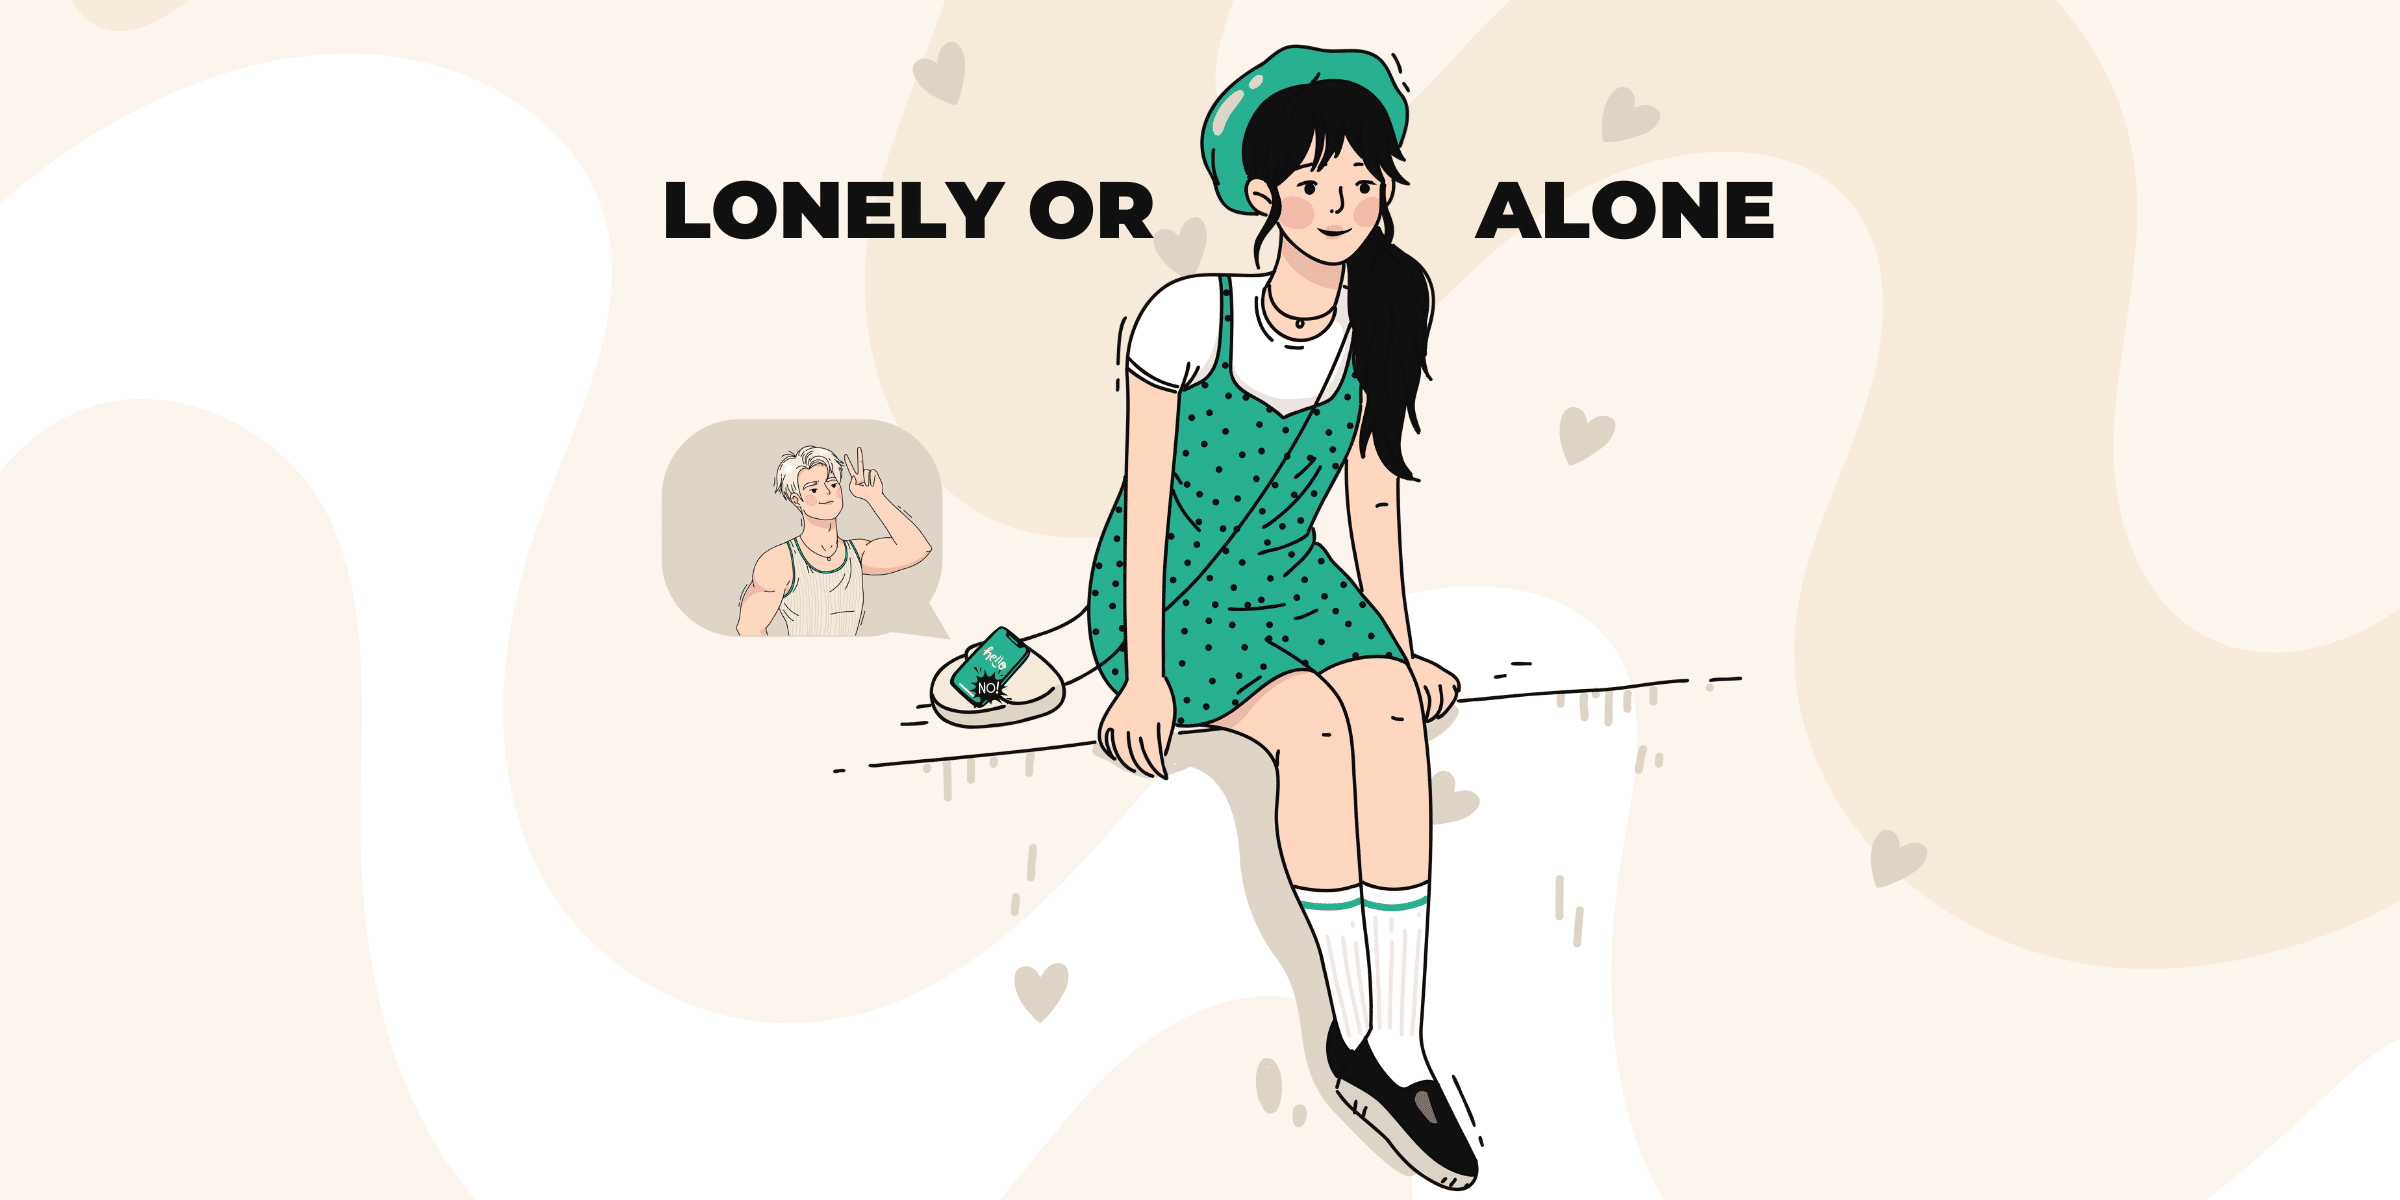 Do you think you’re feeling lonely or alone in your relationship? Our alone vs. lonely guide will help you better understand and overcome what you might be feeling.